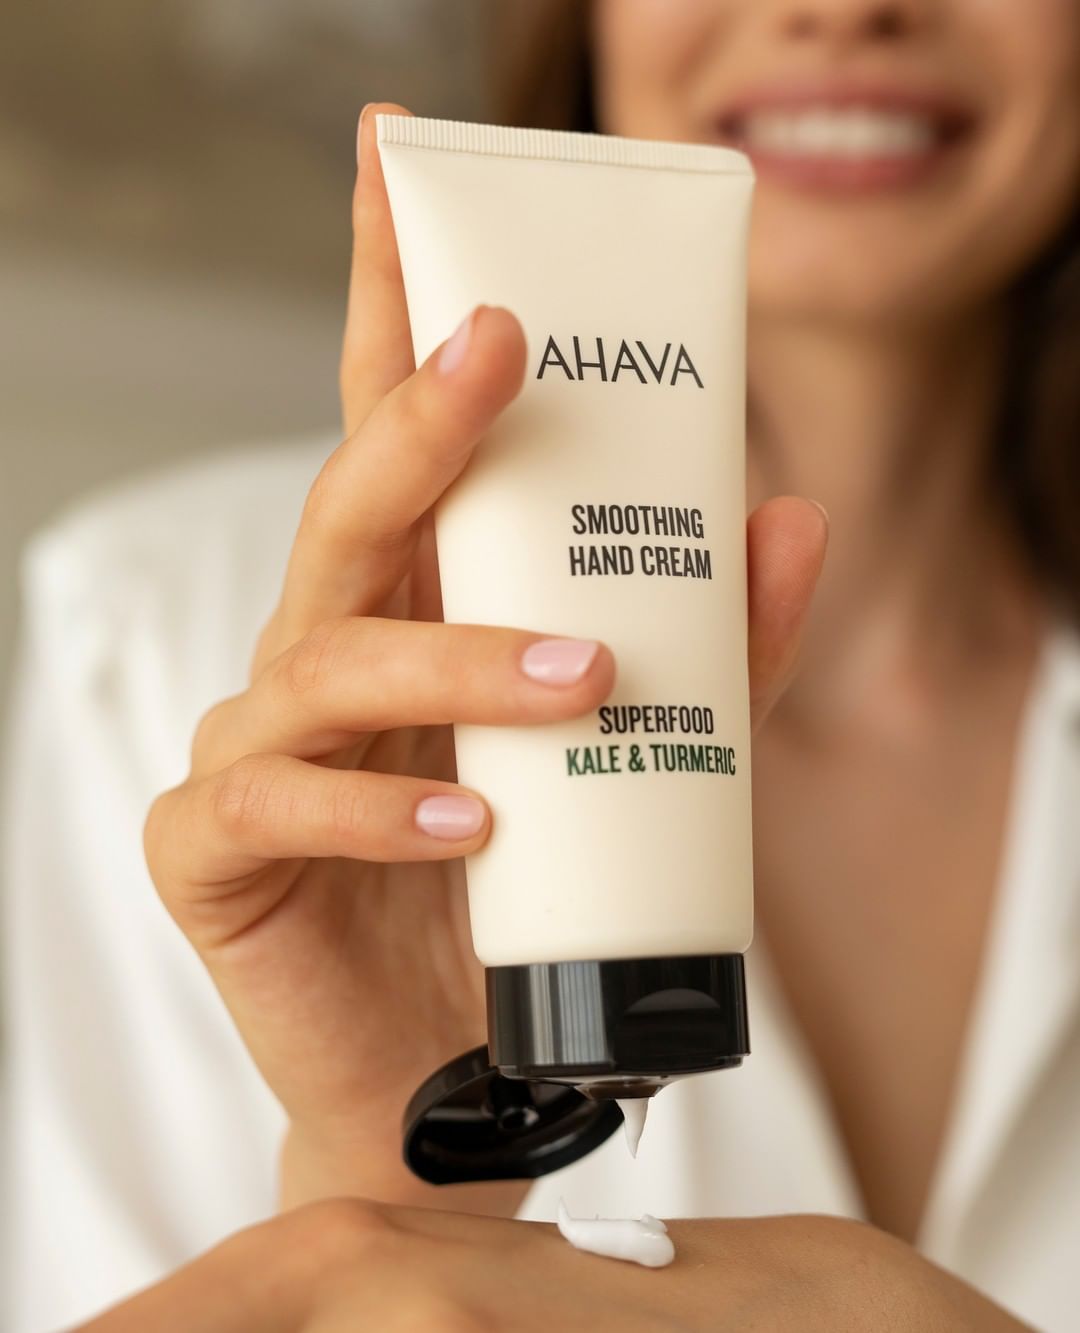 AHAVA - Have you fed your hands today? We created our newest hand cream with superfoods such as kale and turmeric to keep your hands nourished and to safeguards against premature aging 🖐🏼⁠
.⁠
.⁠
.⁠
.⁠...